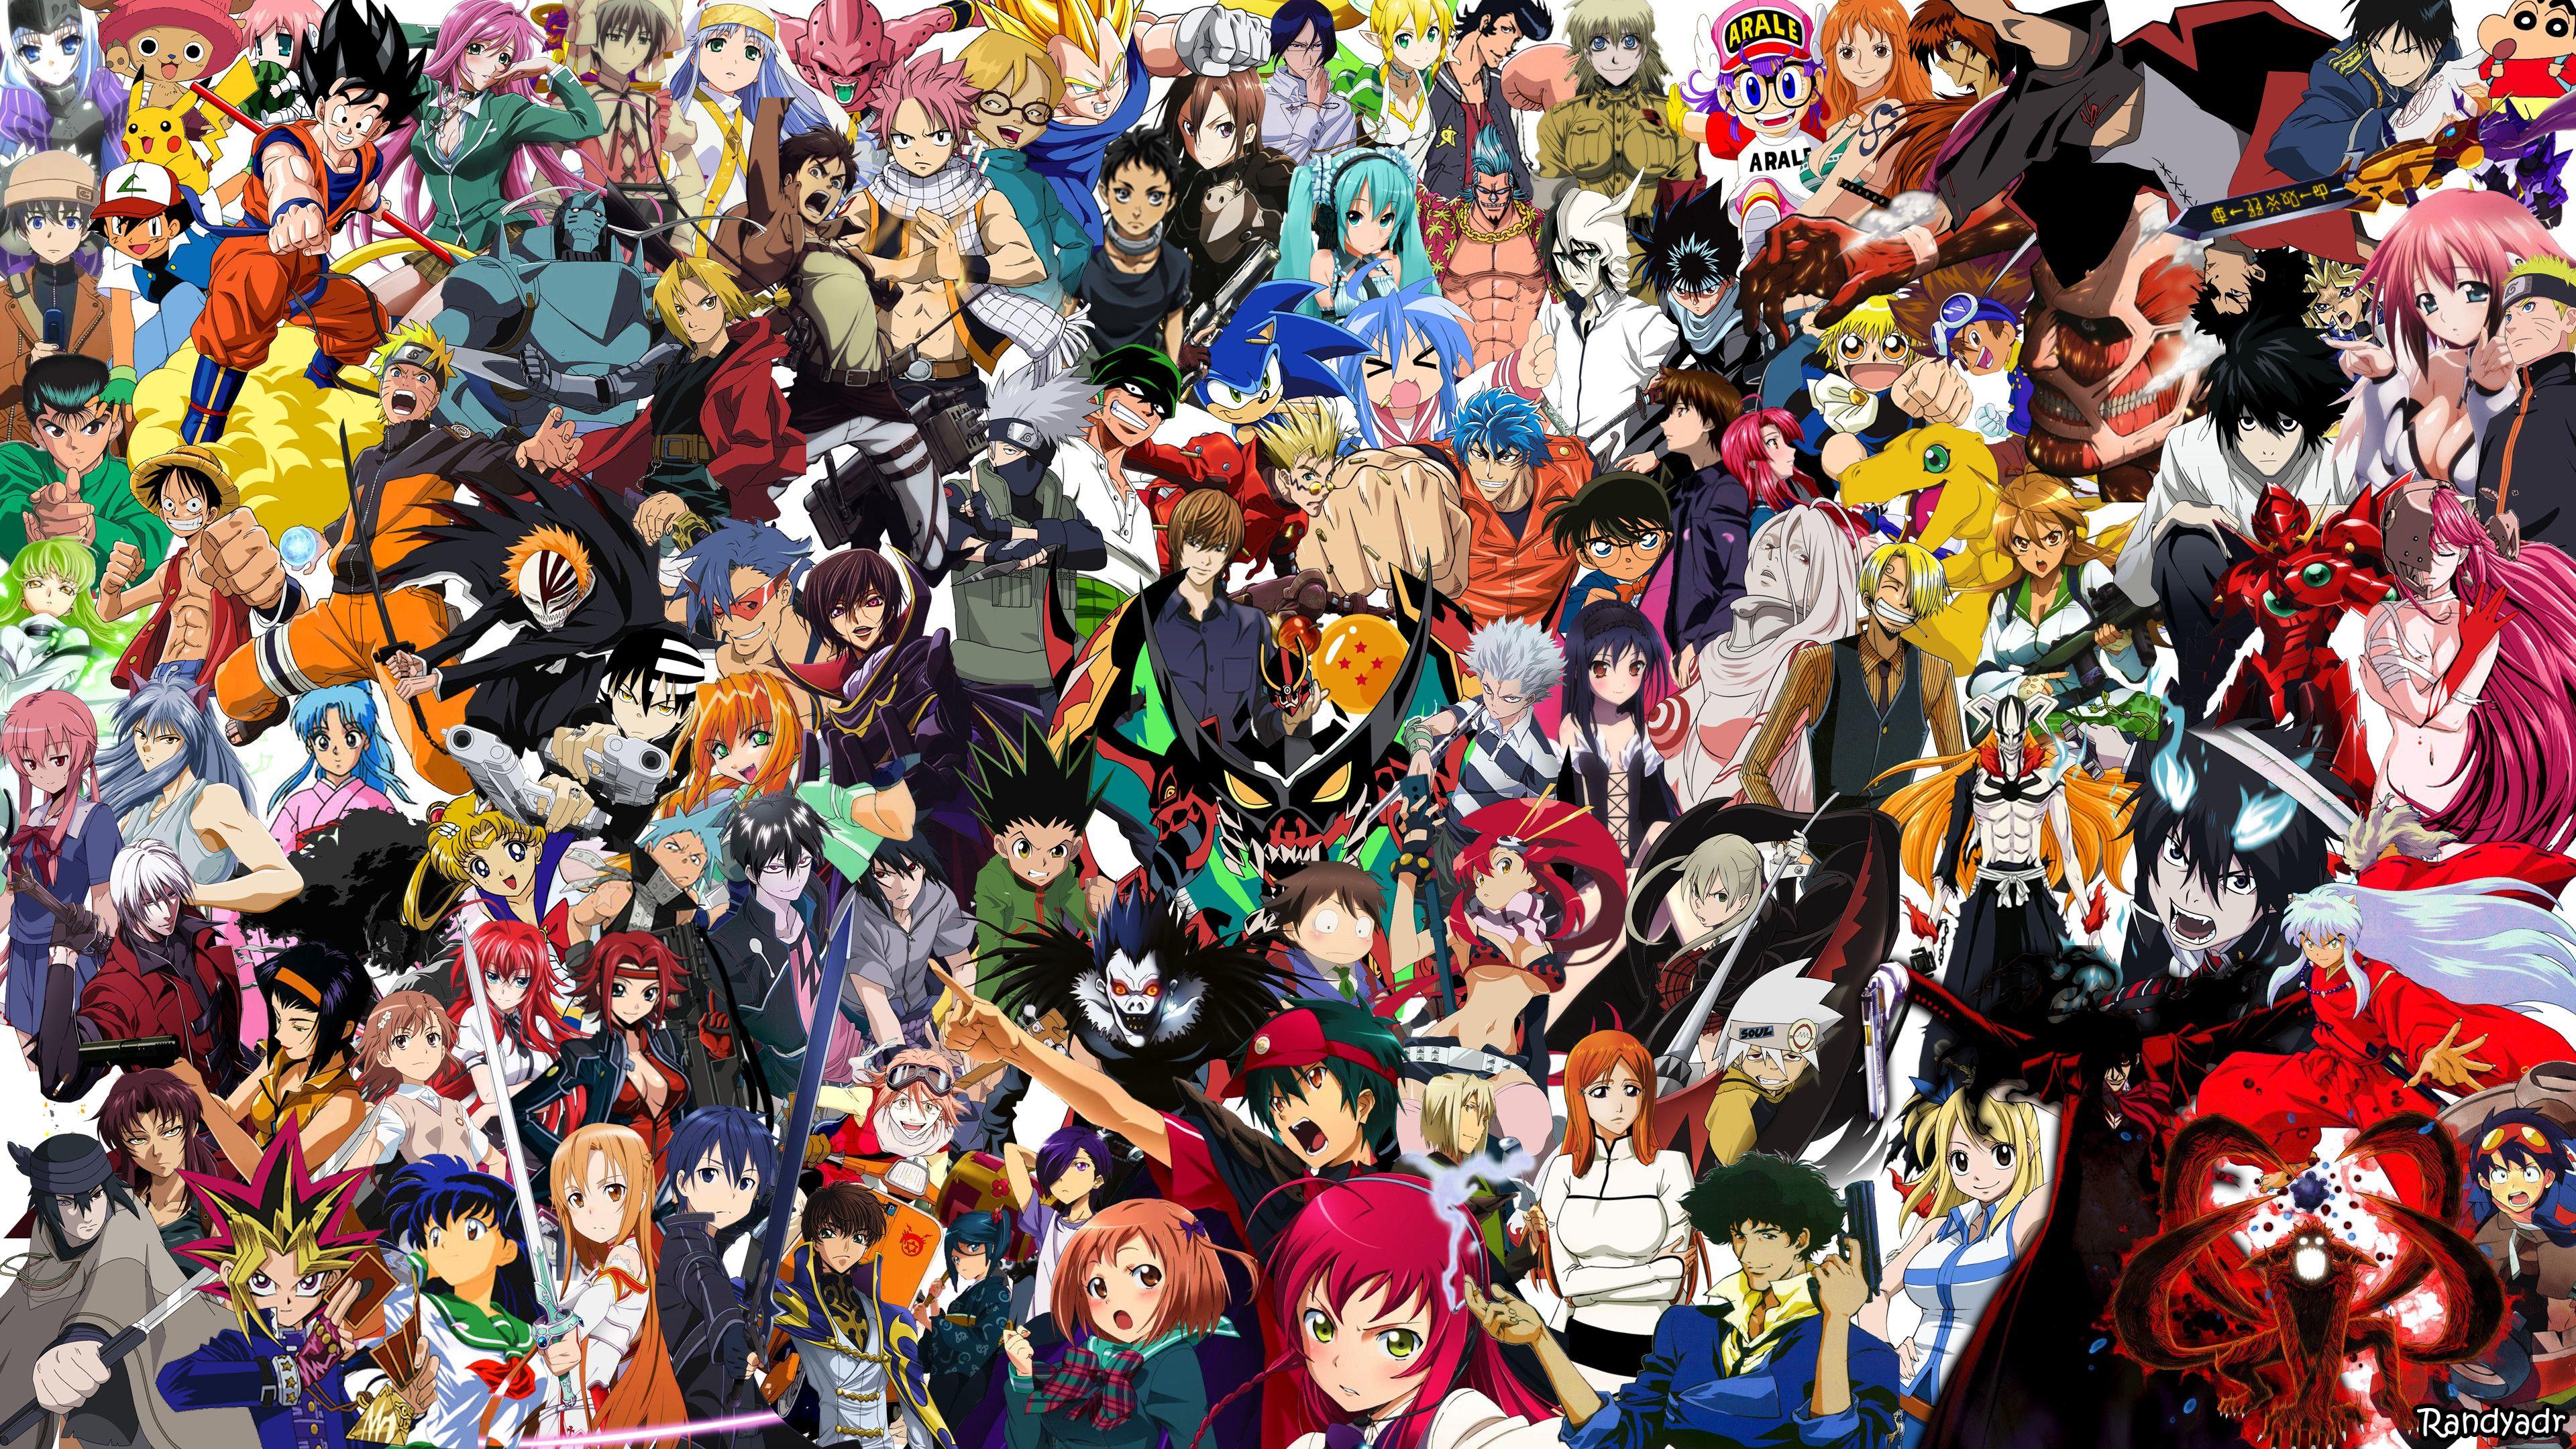 Anime Crossover Wallpaper Free Anime Crossover Background